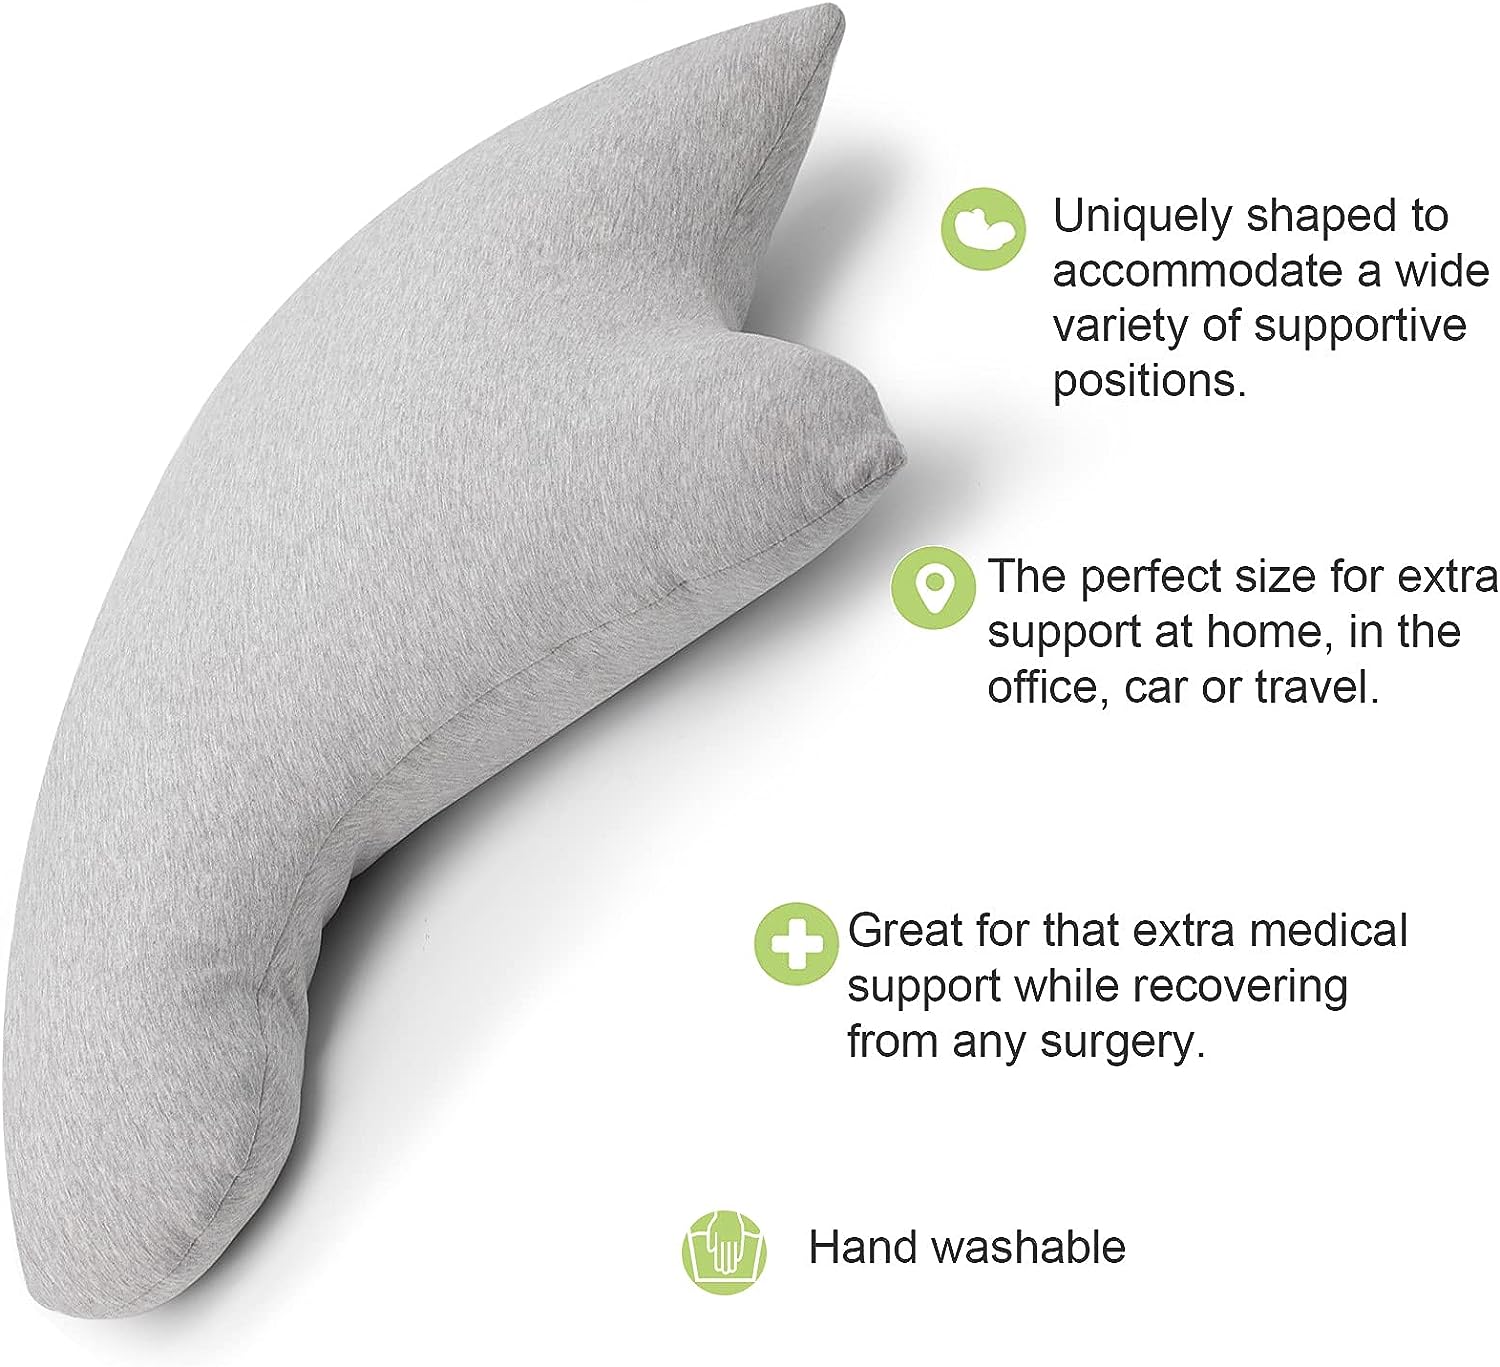 BESLKB Rotator Cuff Pillow Review - Shoulder Surgery Comfort Zone